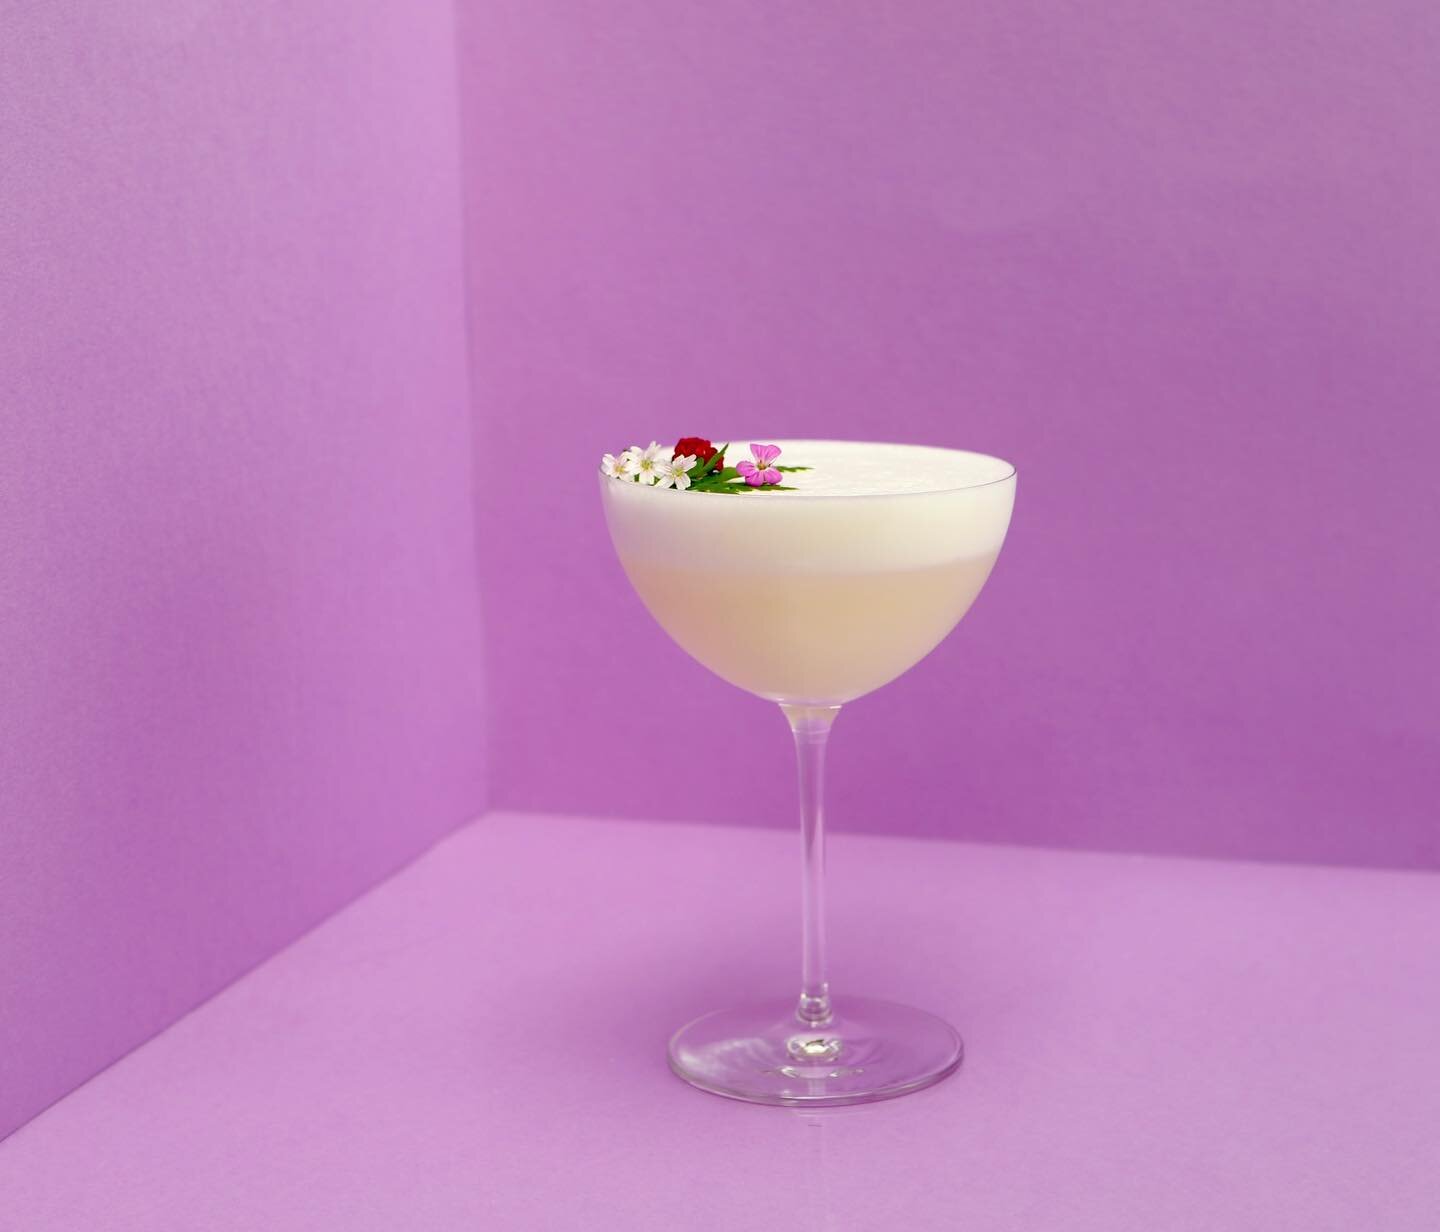 Happy Valentines from the Barnomadics team! Here&rsquo;s one to make at home for a loved one. 

50ml Gin
10ml Peach liquer
10ml Pink Grapefruit 
10ml Lemon juice
10ml Monin Rose syrup 
Egg White 
Orange blossom water